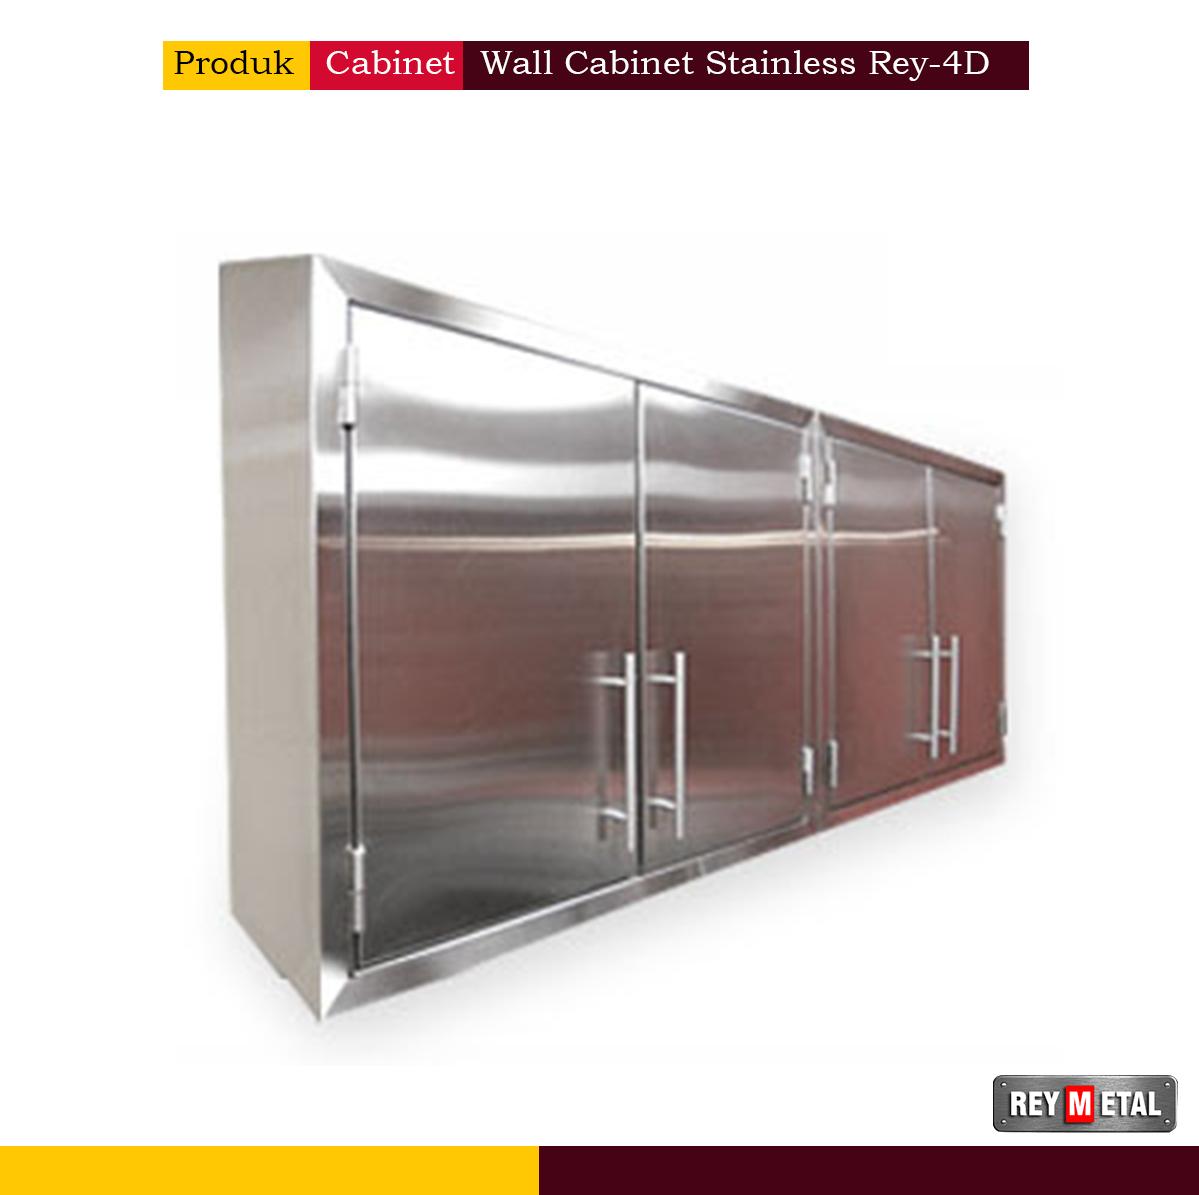 Wall Cabinet Stainless Rey 4D